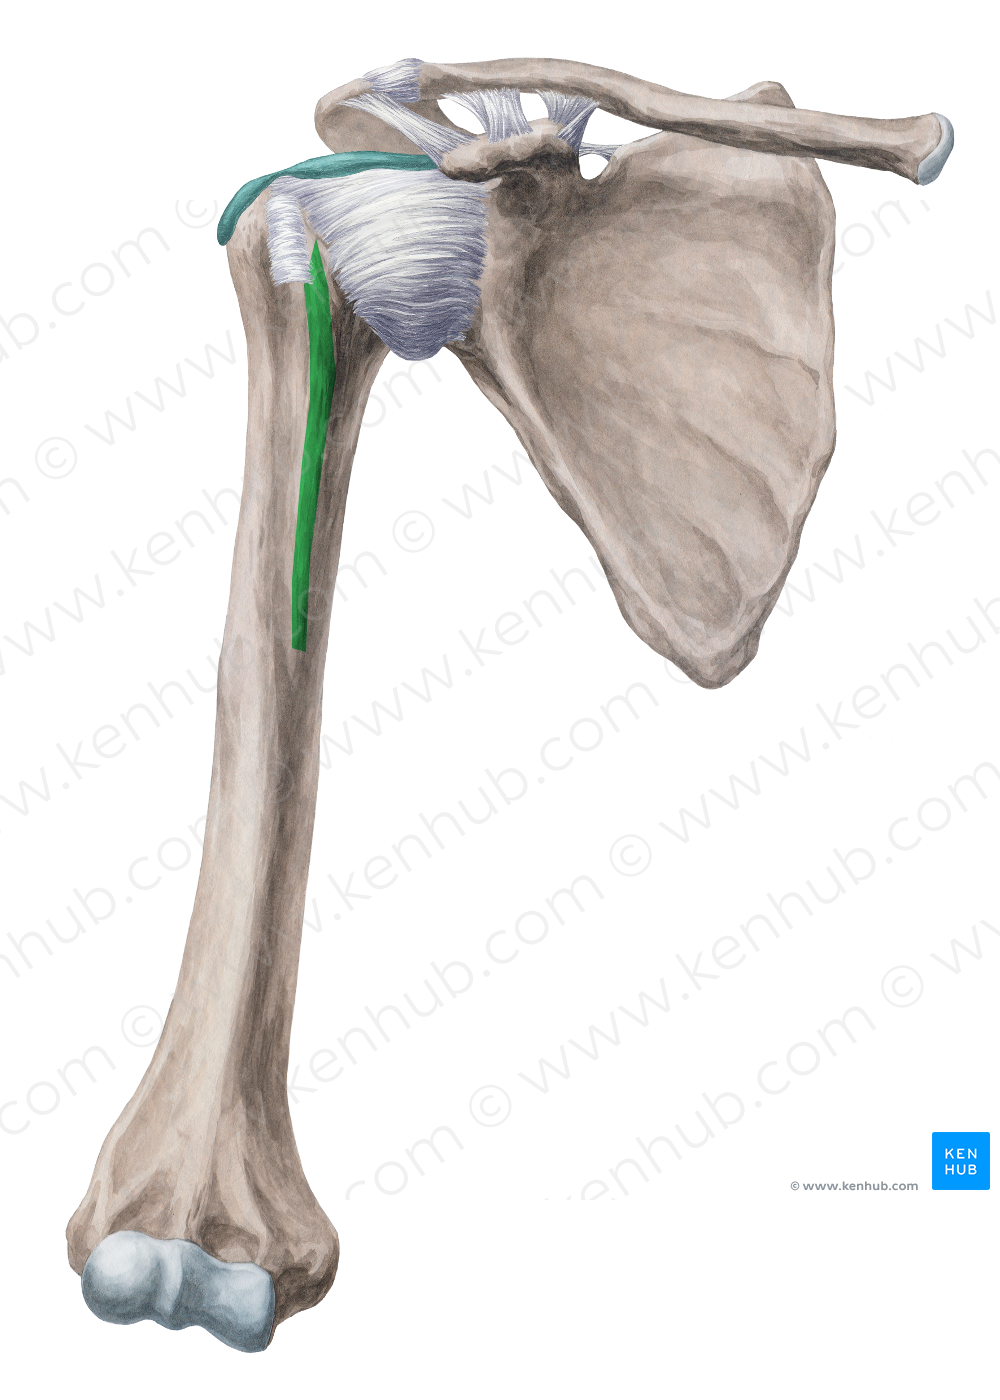 Crest of lesser tubercle of humerus (#3142)